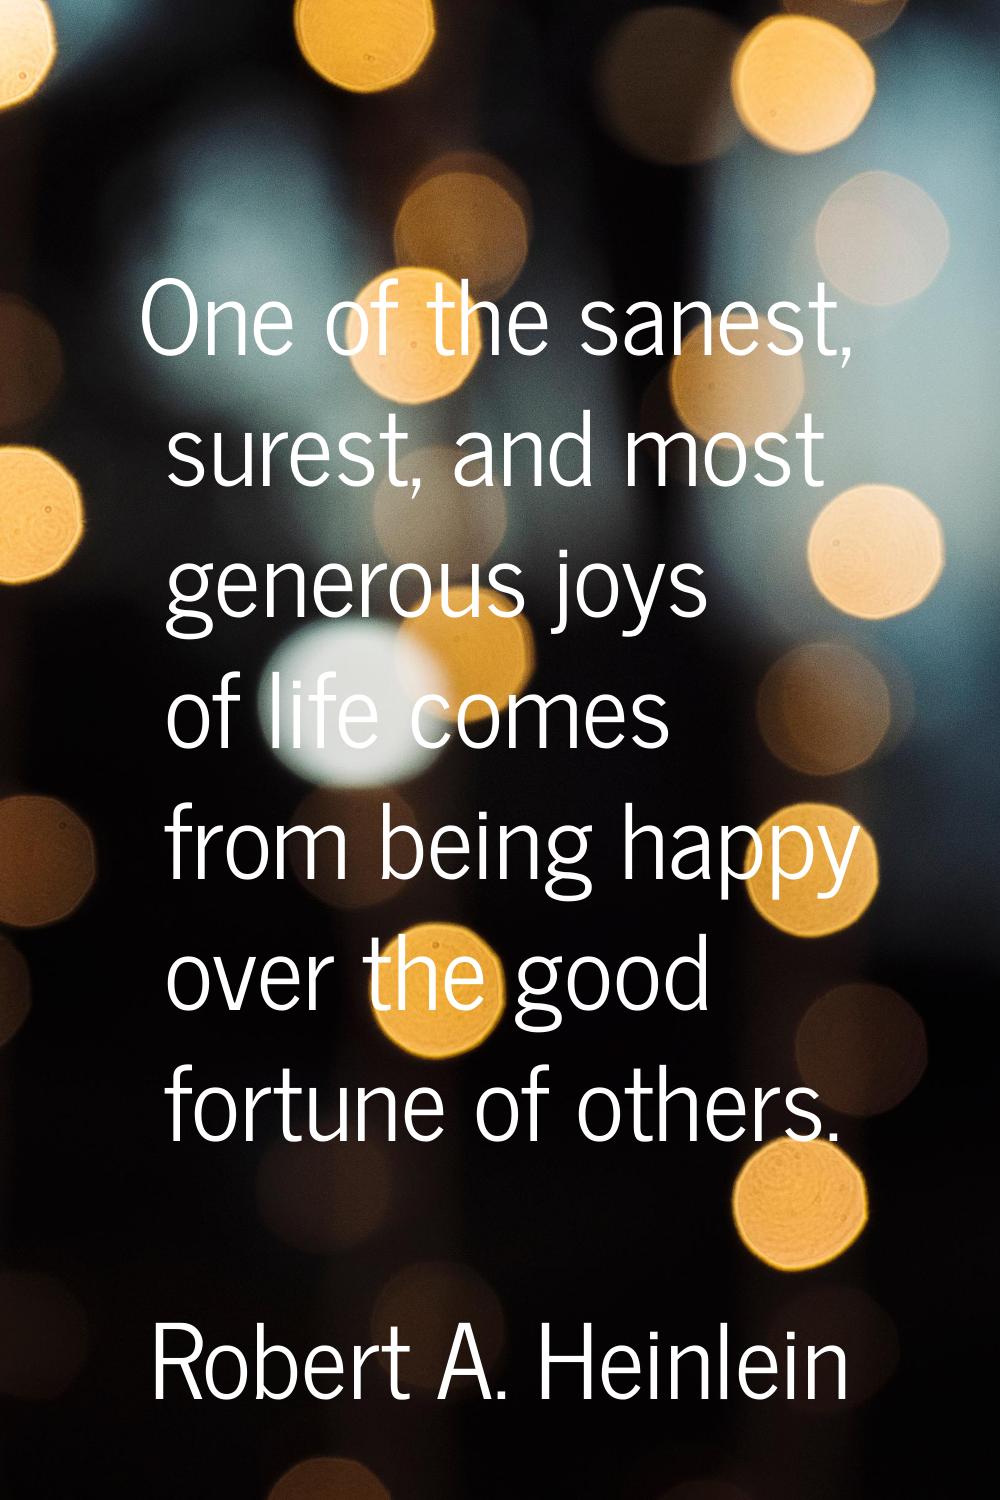 One of the sanest, surest, and most generous joys of life comes from being happy over the good fort